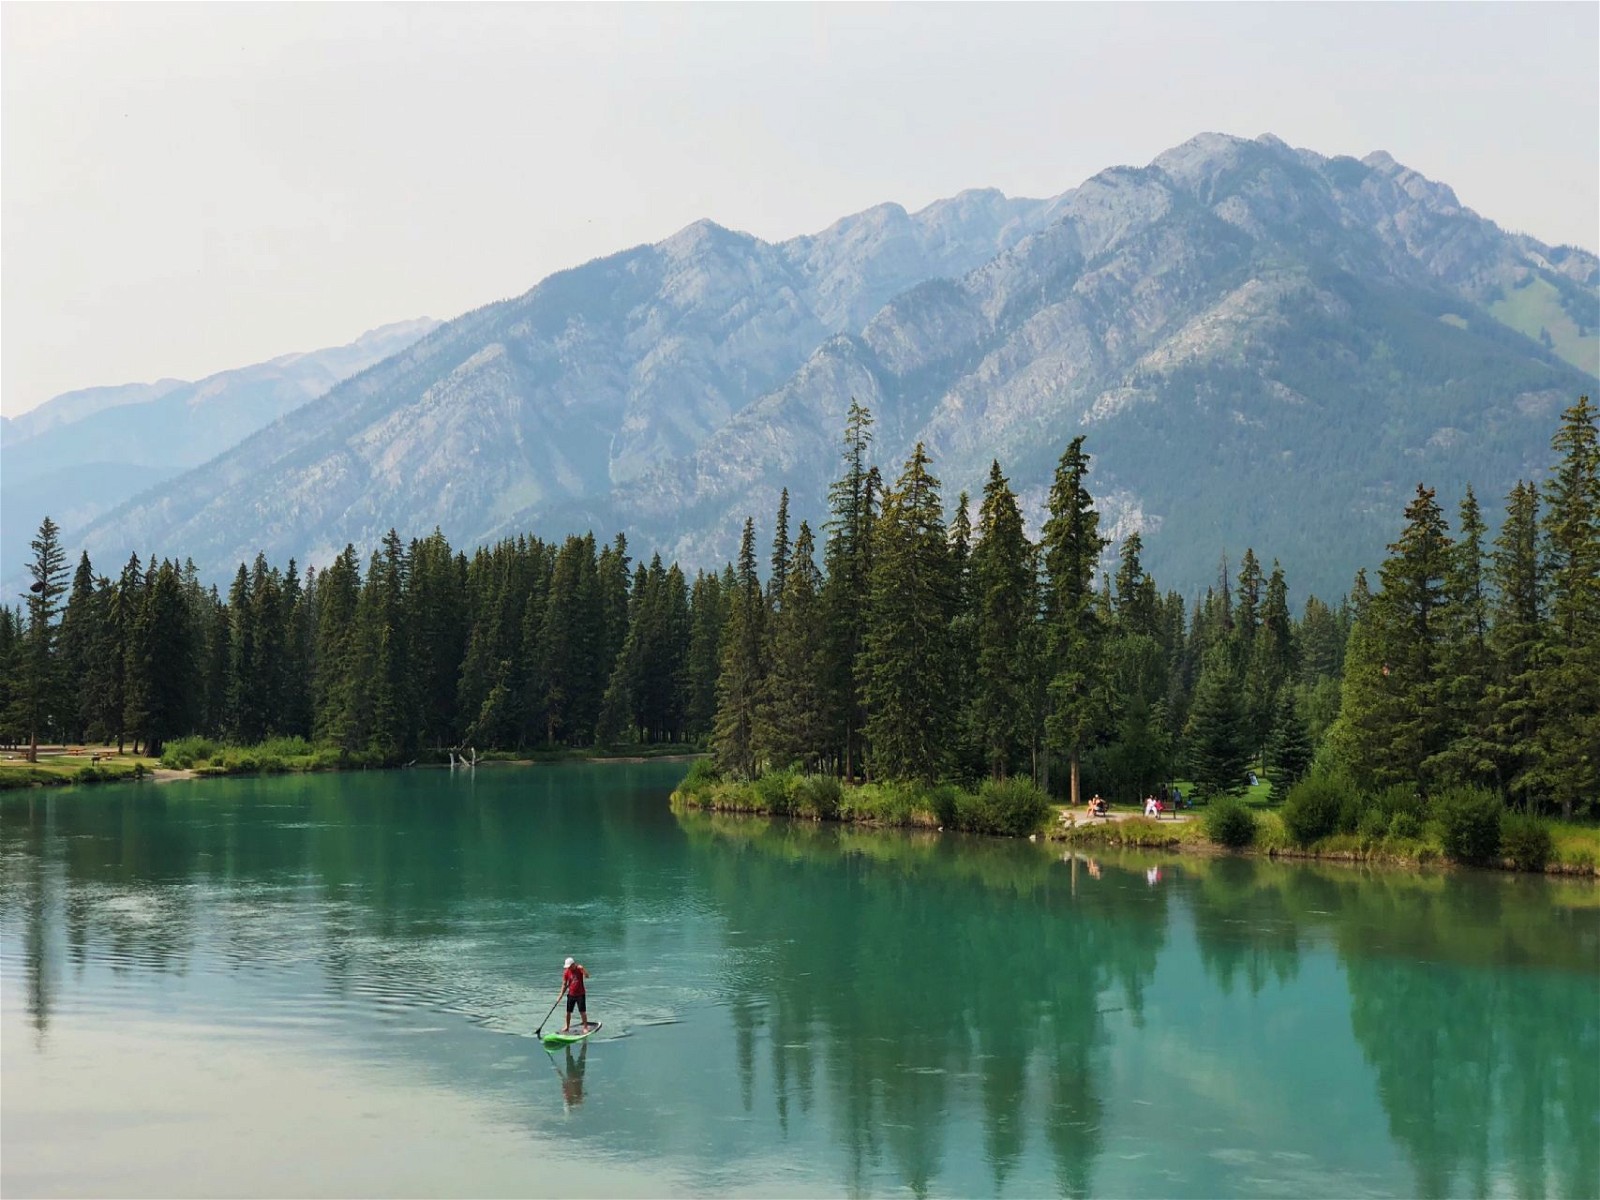 Banff National Park is a stunning natural wonder that attracts millions of visitors each year